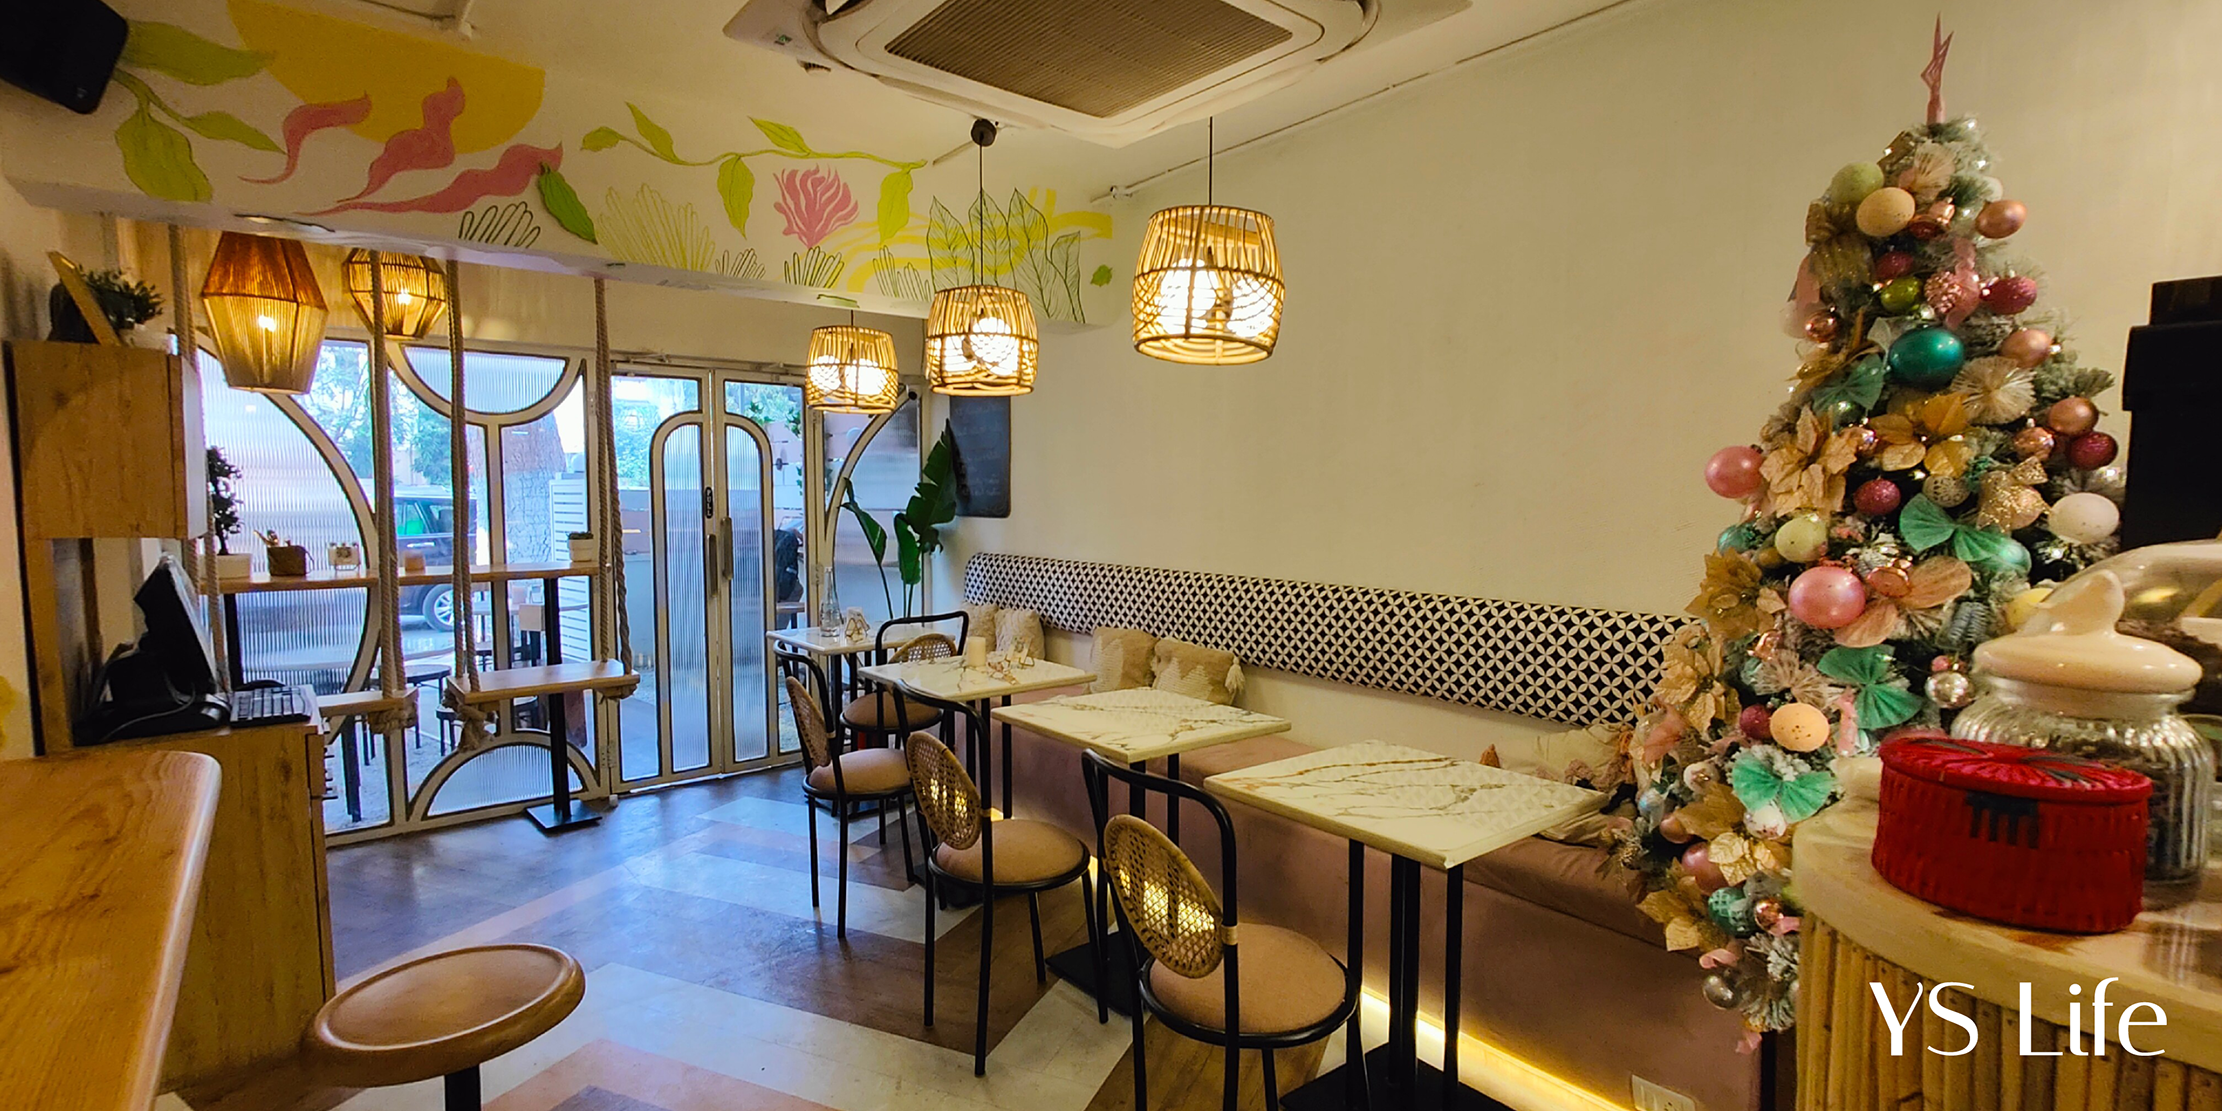 Enjoy mindful eating, with flavourful fare, at this café in Bandra